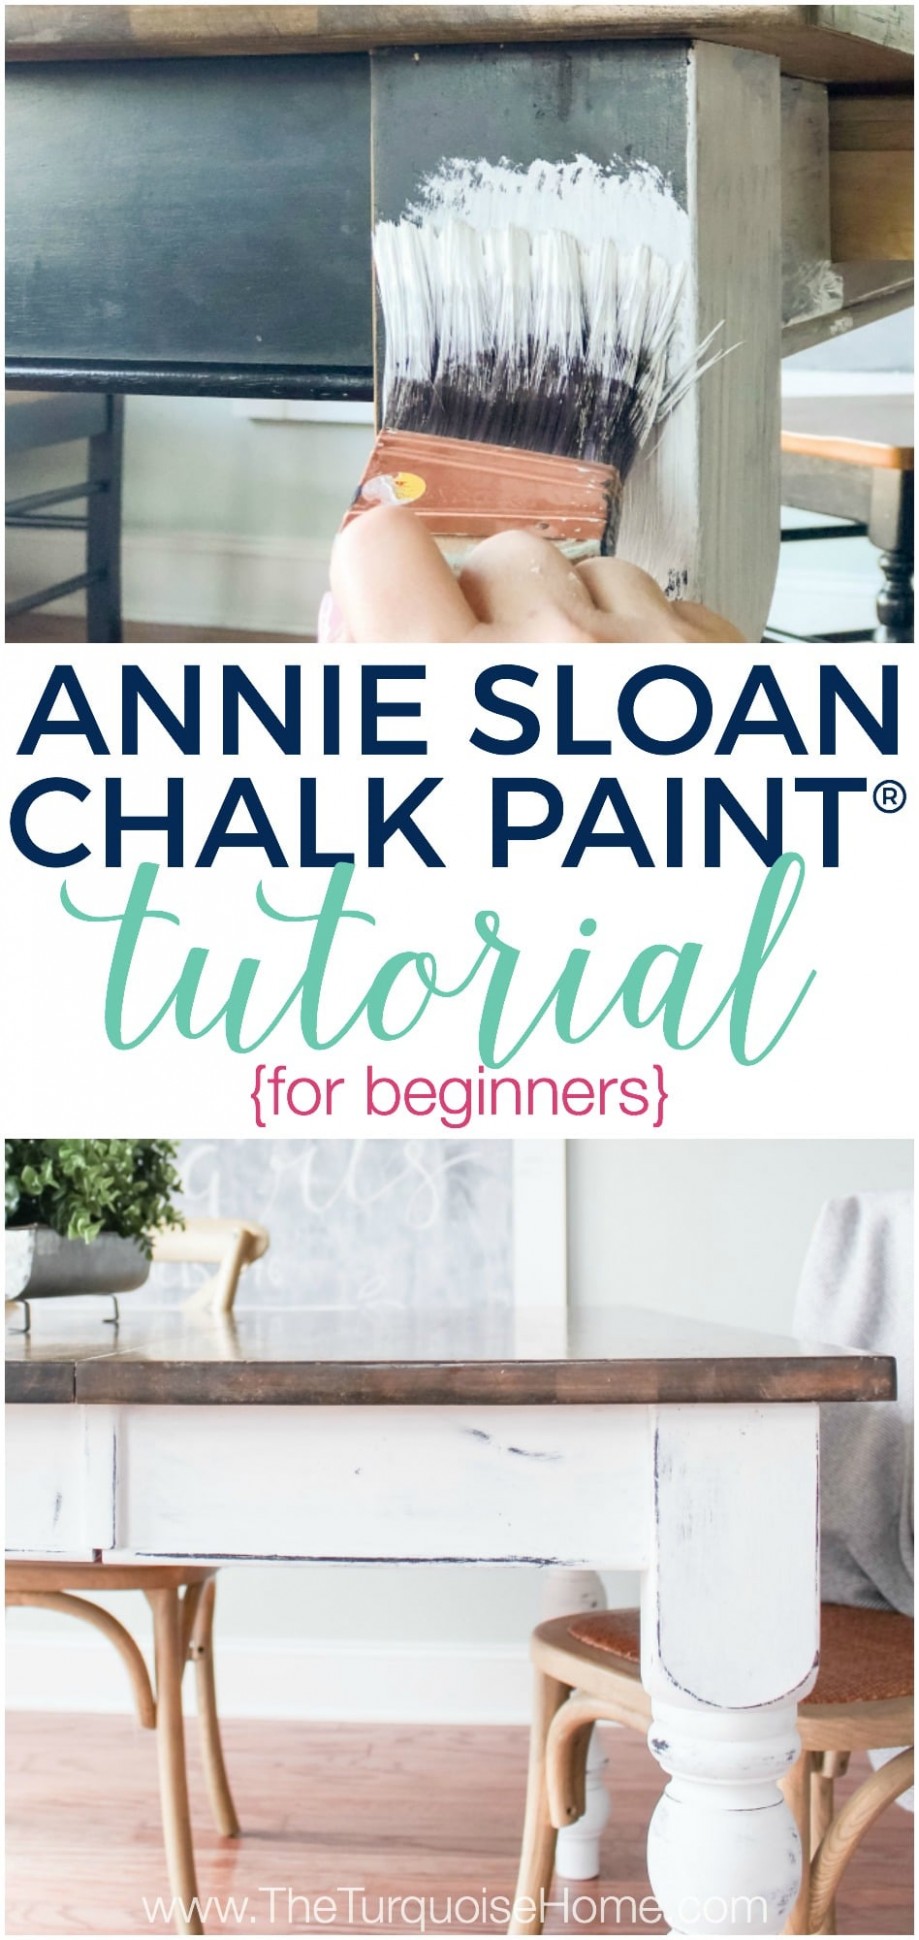 How To Use Annie Sloan Chalk Paint (perfect For Beginners!) Were To Buy Annie Sloan Chalk Paint